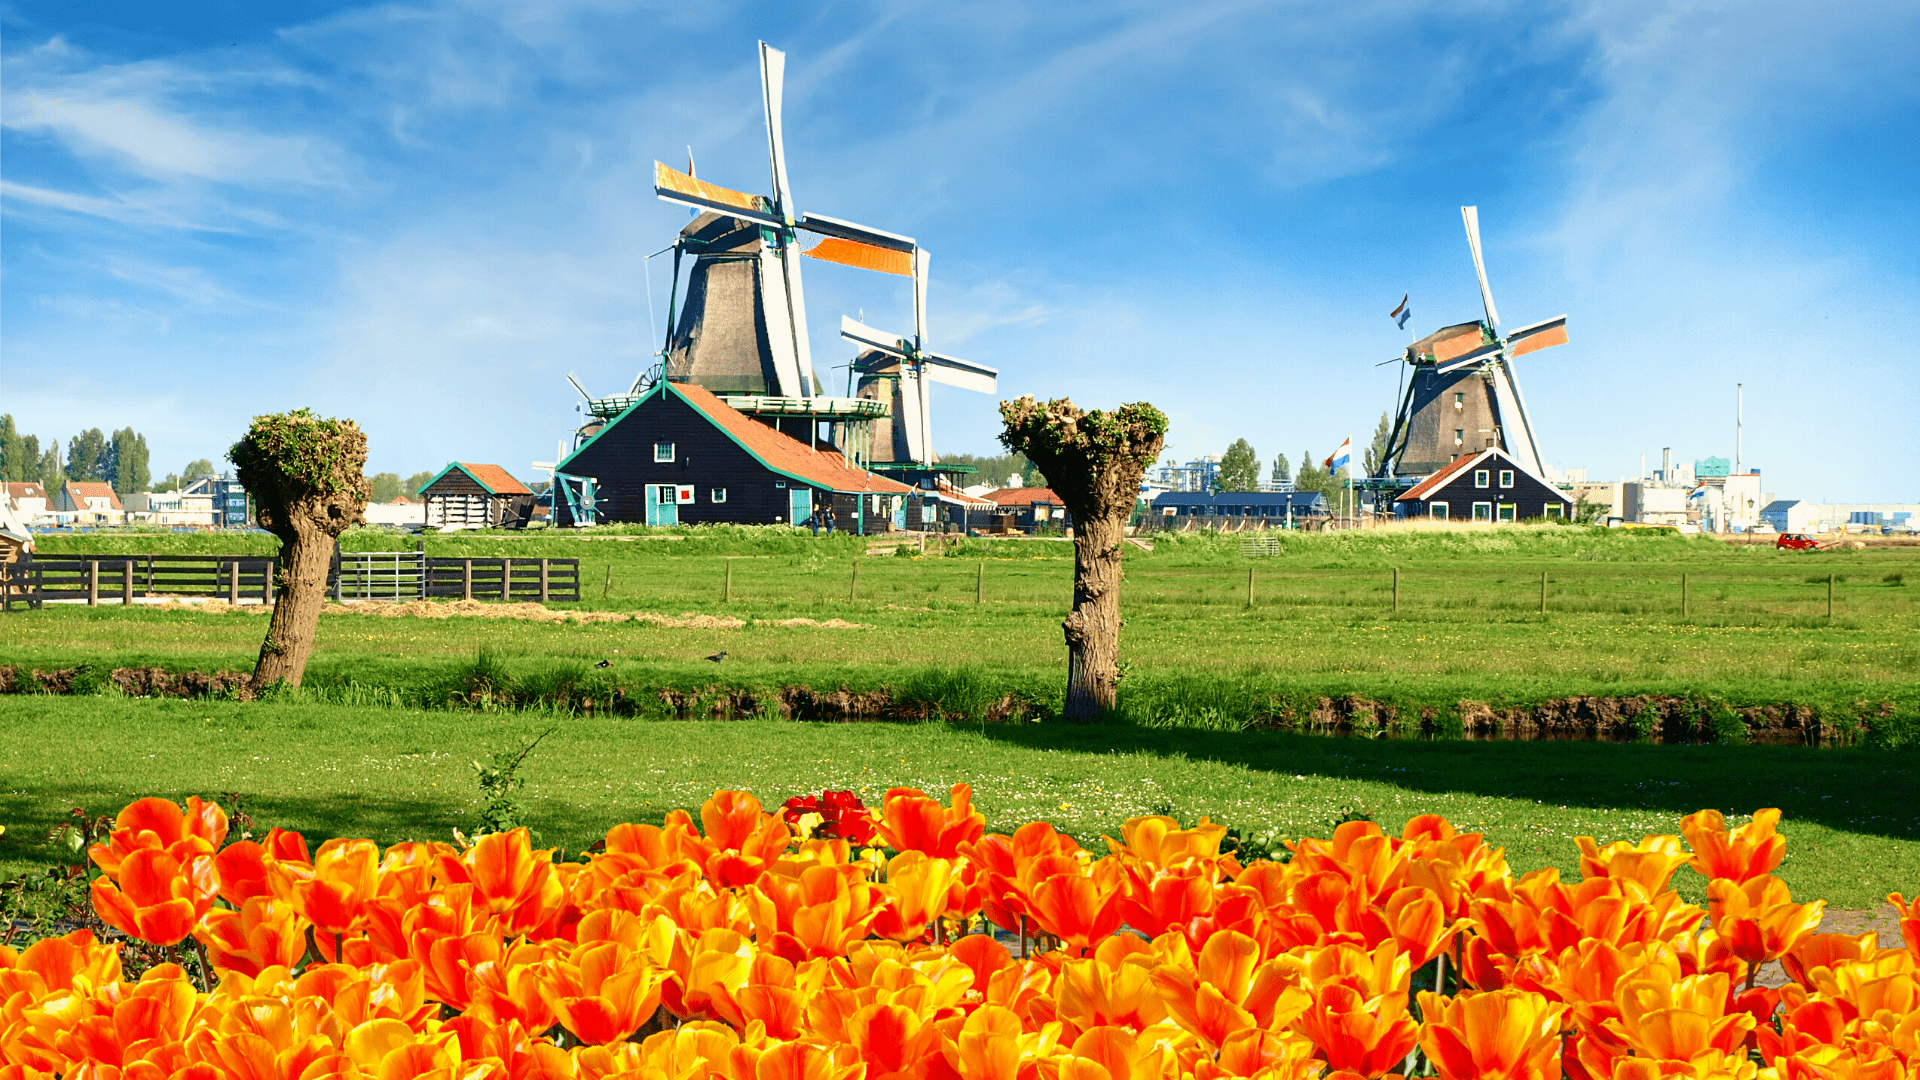 Glimpse of Europe, The Netherlands